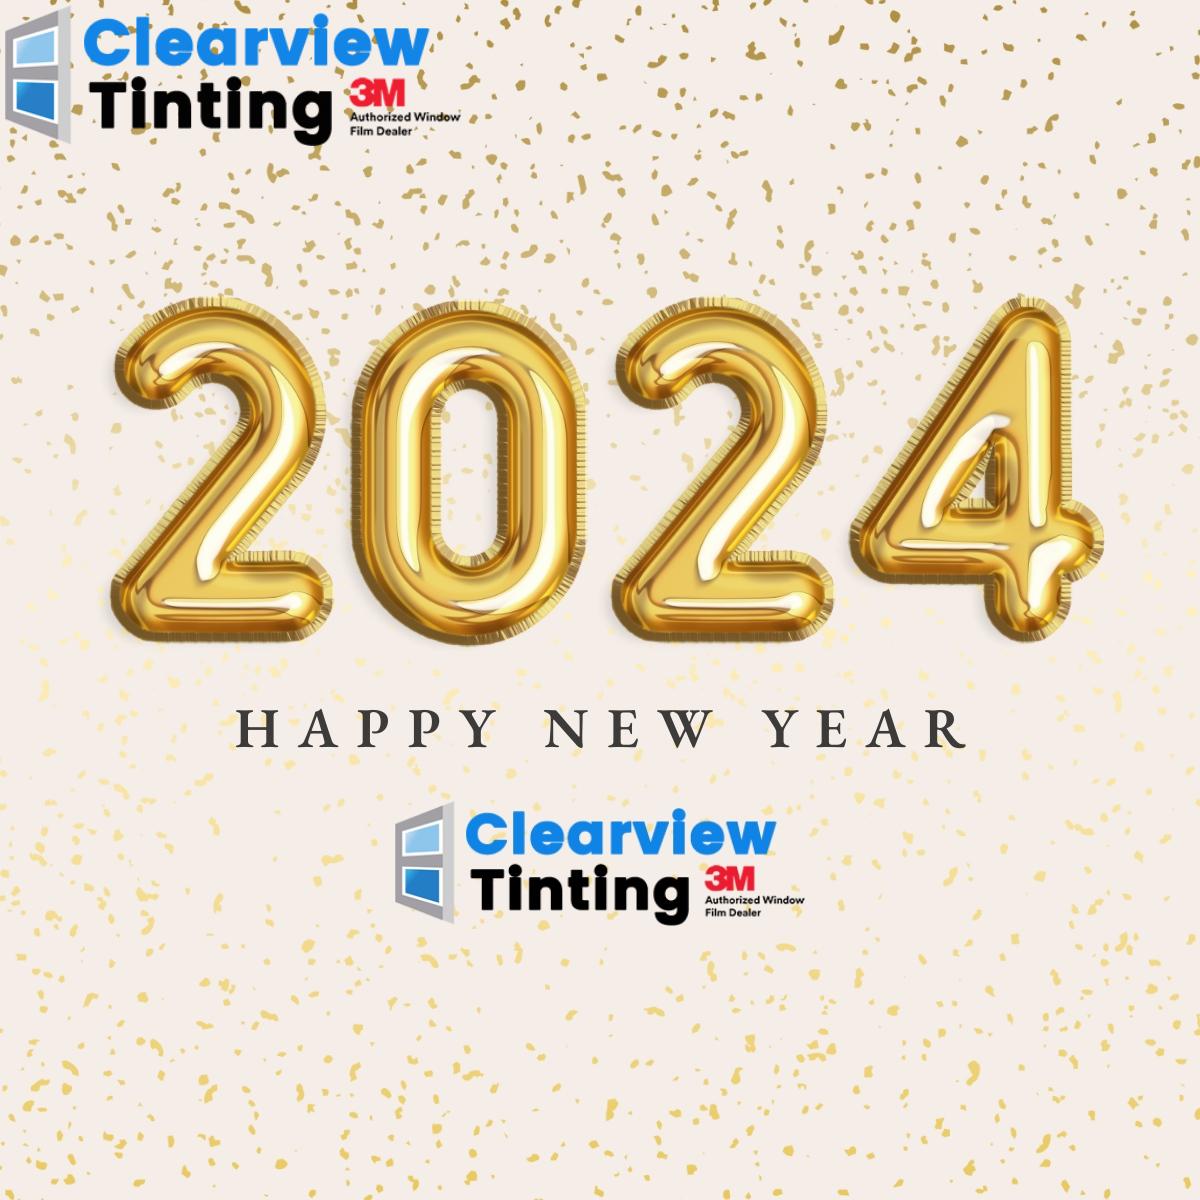 Happy New Year to all! We hope you have a safe and enjoyable holiday and that 2024 brings many blessings. 🥳 #ClearviewTinting will be closed today, January 1, but will reopen to serve our #ToledoOH community and the surrounding areas again on January 2! 🤗 #HappyNewYear2024 🎉